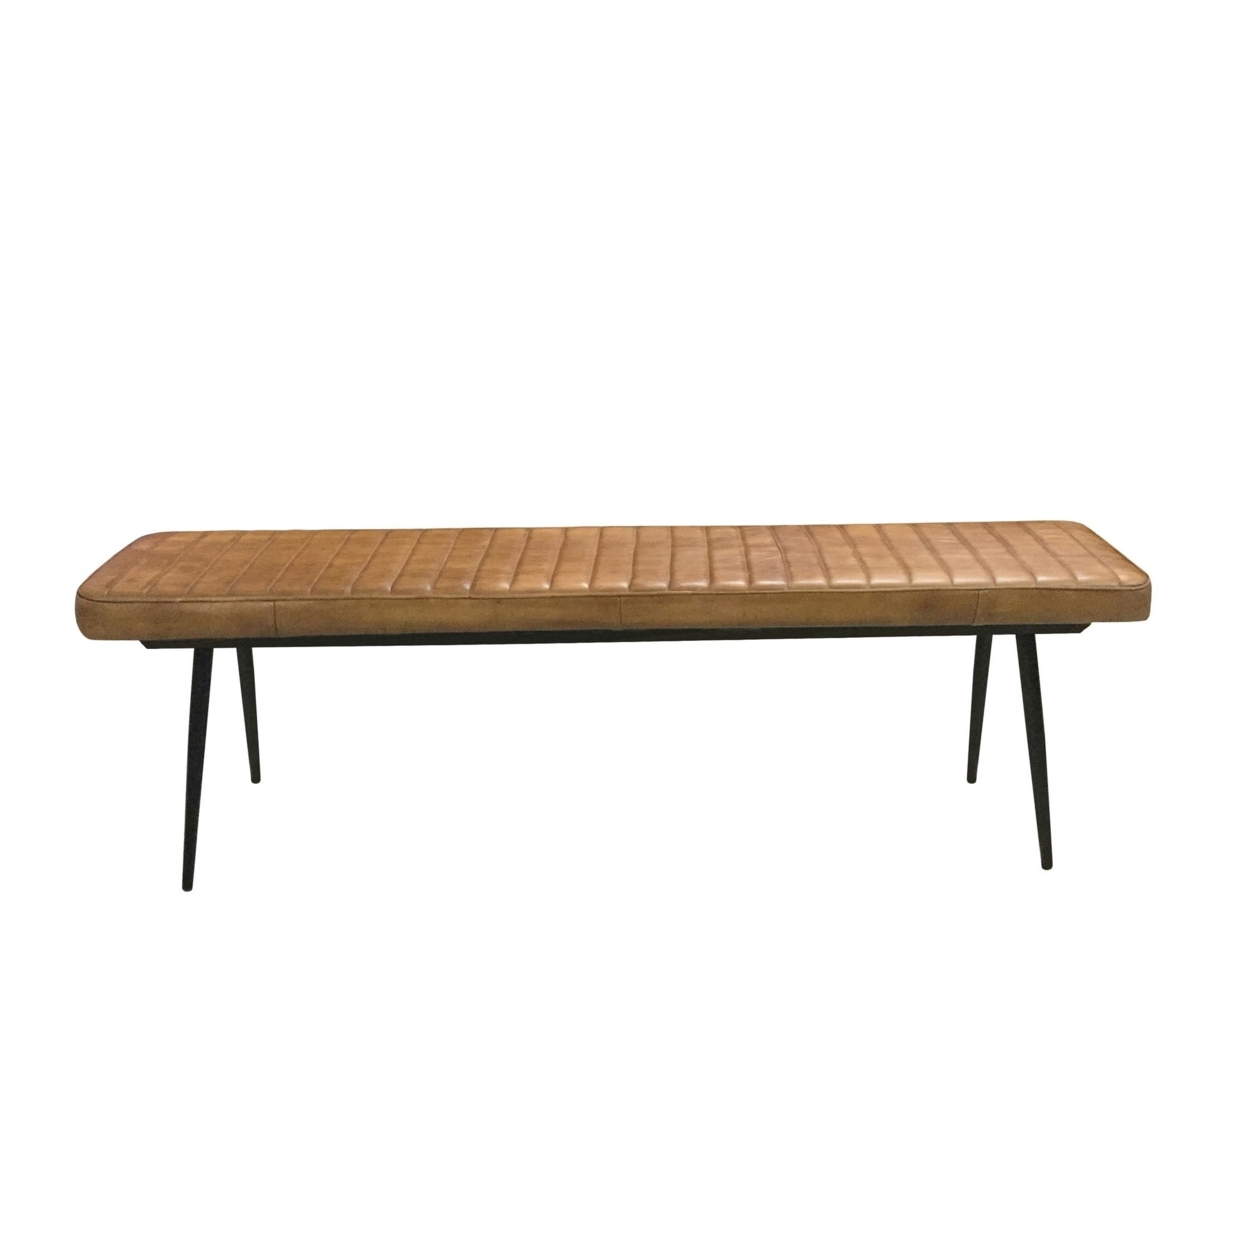 Bench With Tufted Leatherette Seat And Metal Legs, Brown- Saltoro Sherpi